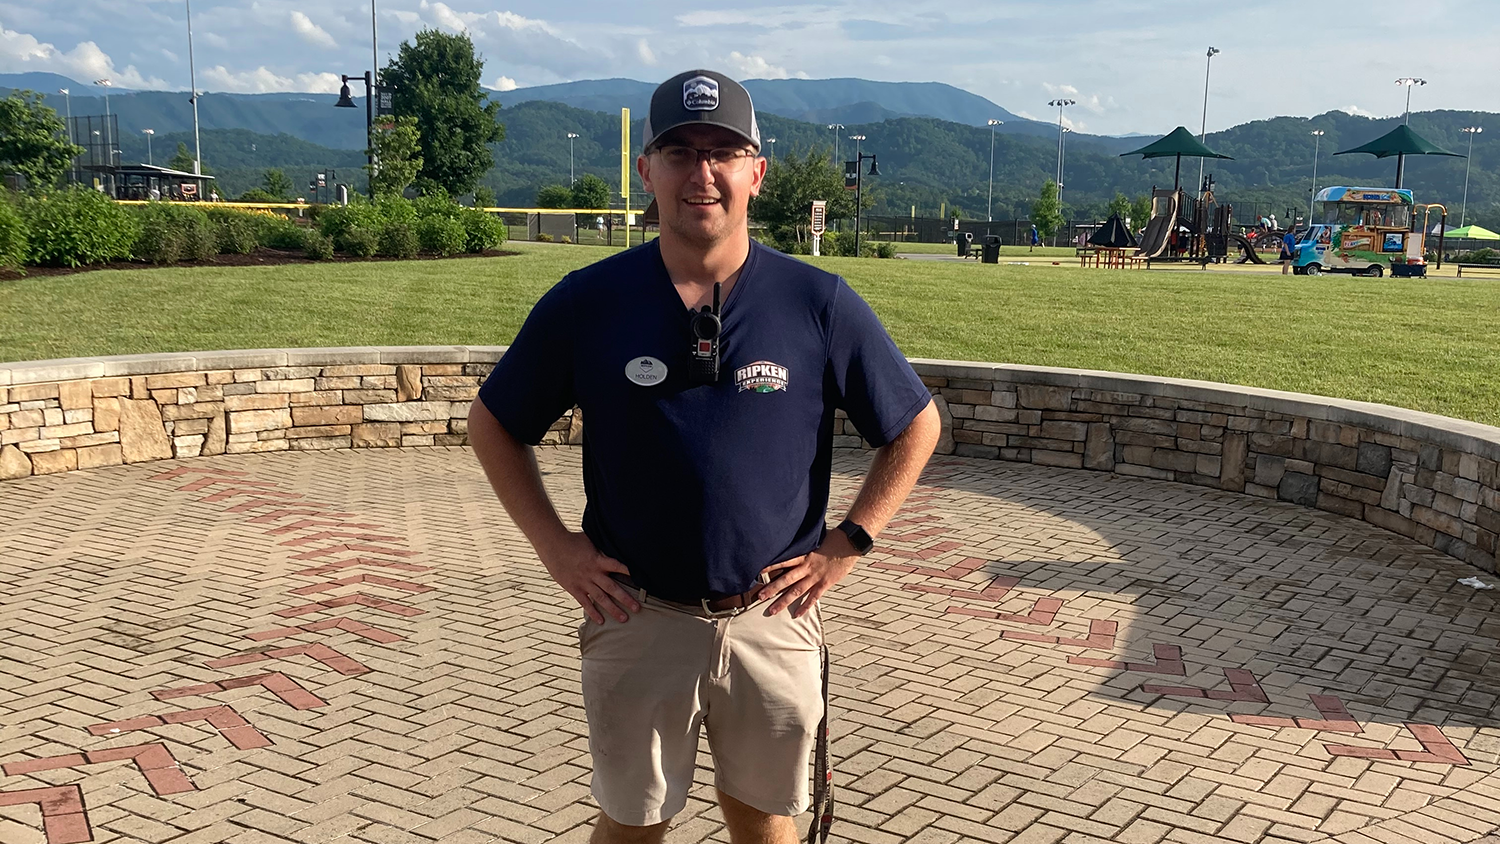 Holden Hartzog outside - Graduation to Vocation: Holden Hartzog is Supporting Youth Soccer Development - College of Natural Resources News NC State University